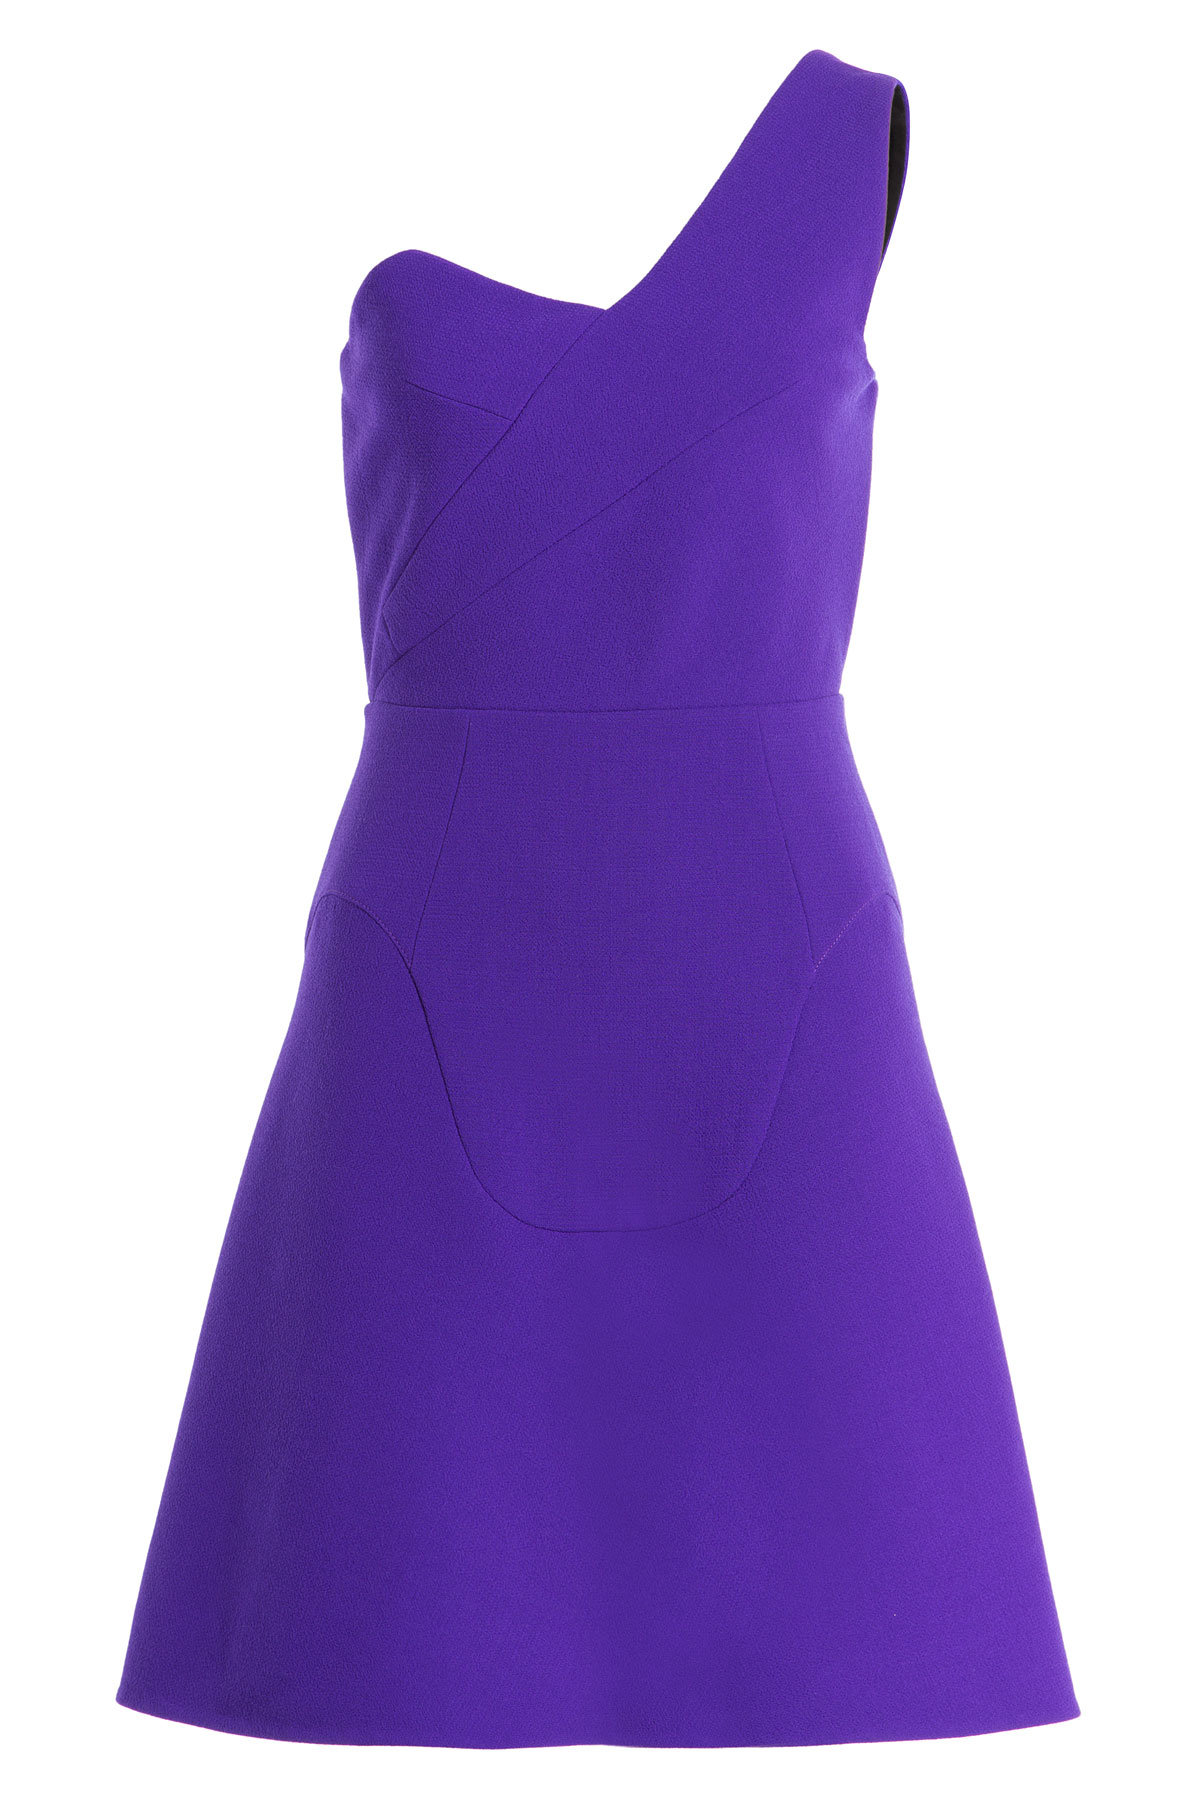 Roland Mouret - Corby Wool Crepe Dress